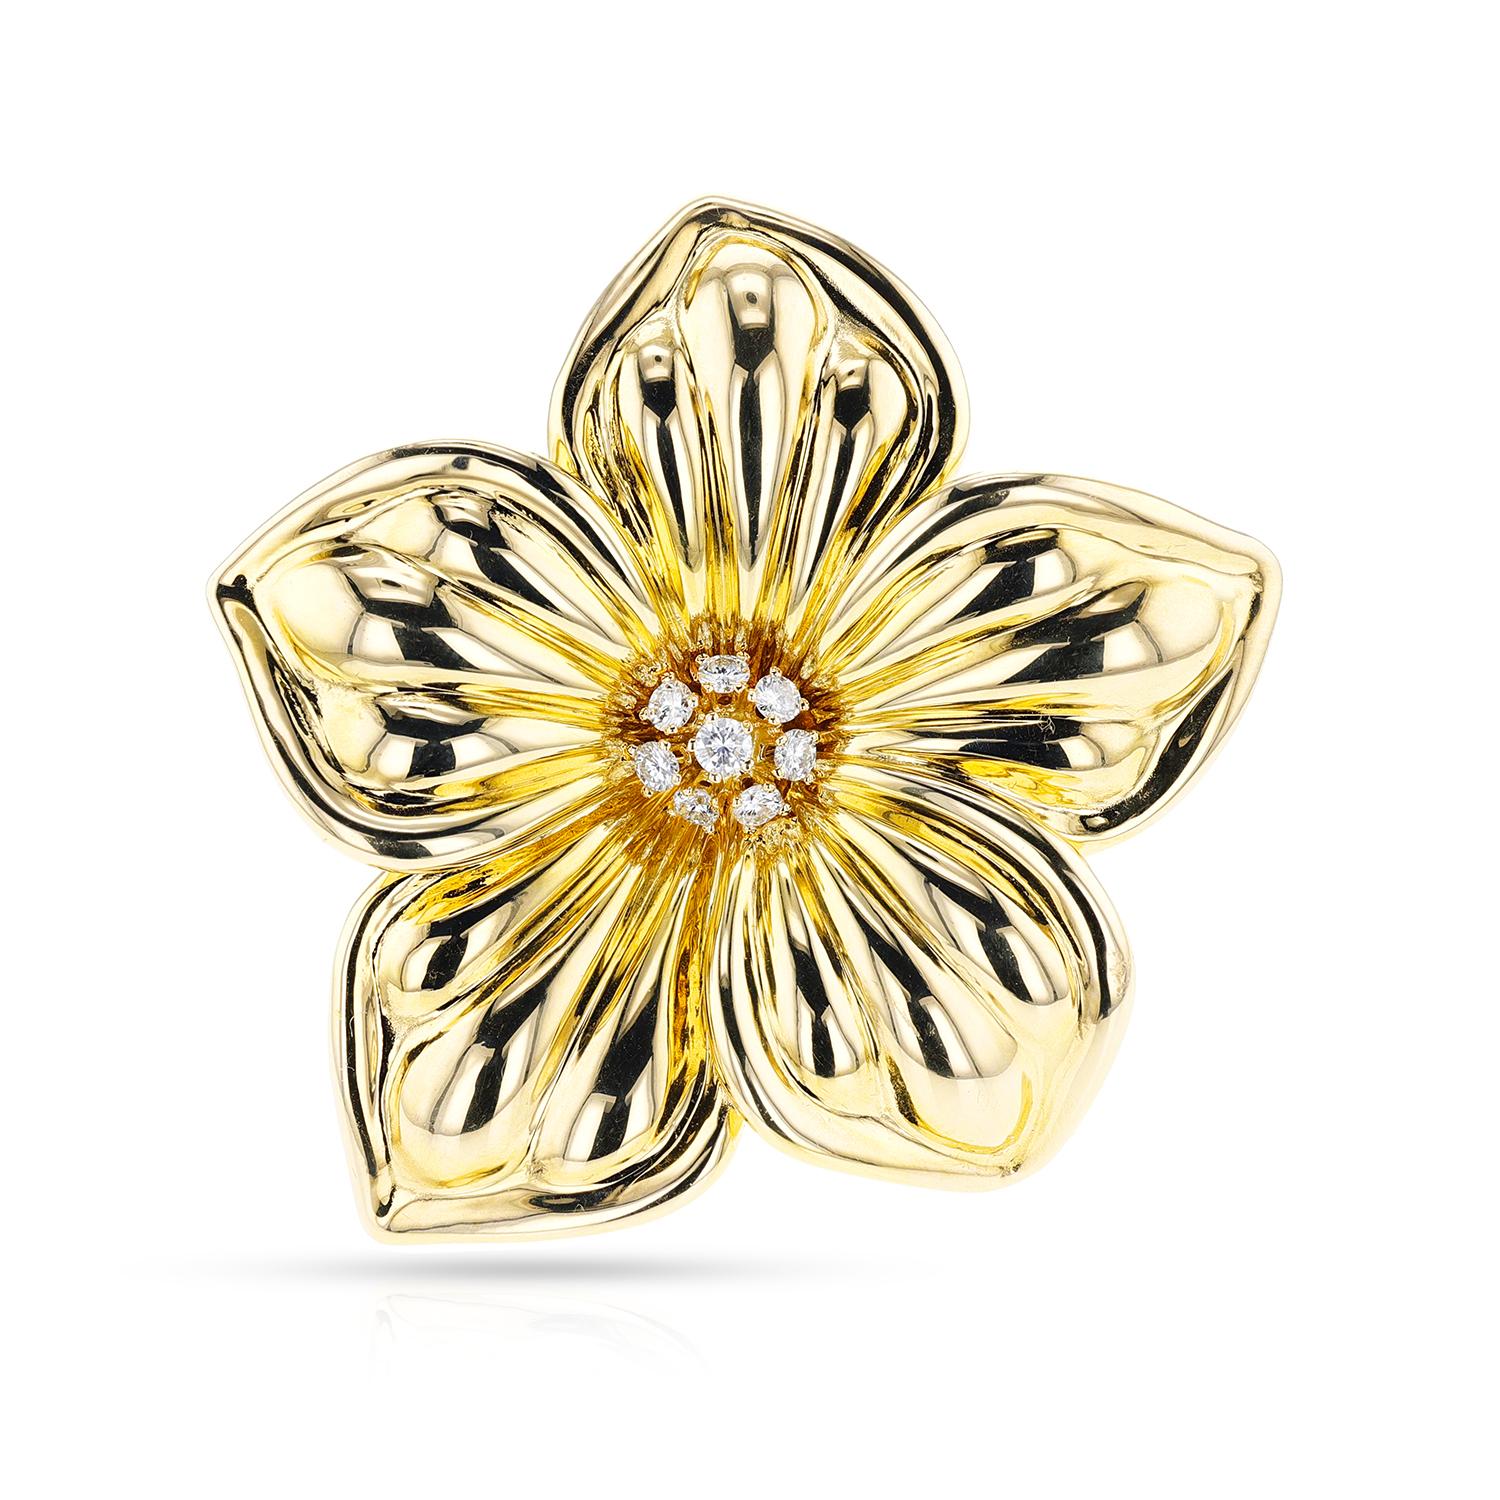 This exquisite Van Cleef & Arpels gold and diamond floral brooch features an intricate design with 18K gold leaves, stems and petals inlaid with shimmering diamonds. This sophisticated piece is perfect for the fashionista looking for an eye-catching